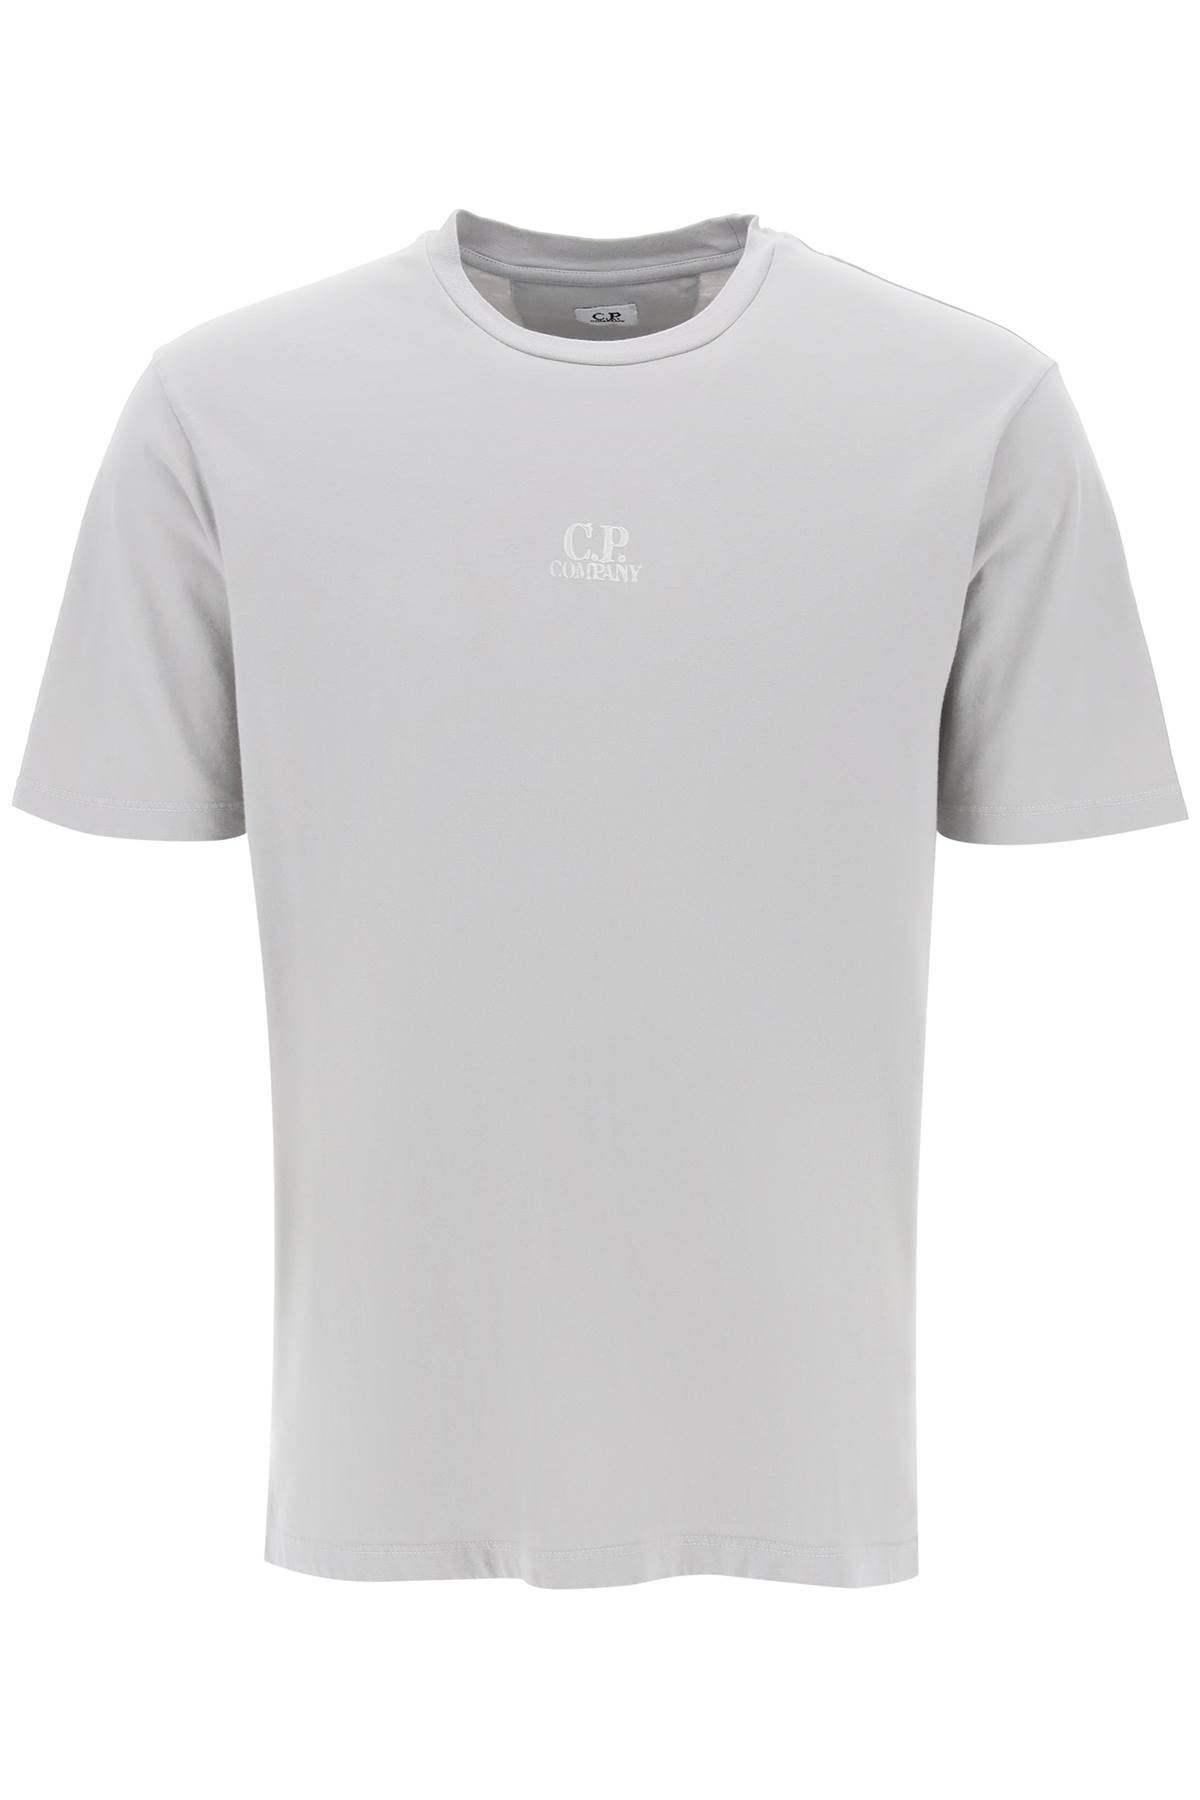 C.p. Company British Sailor Printed T-shirt With In Grey